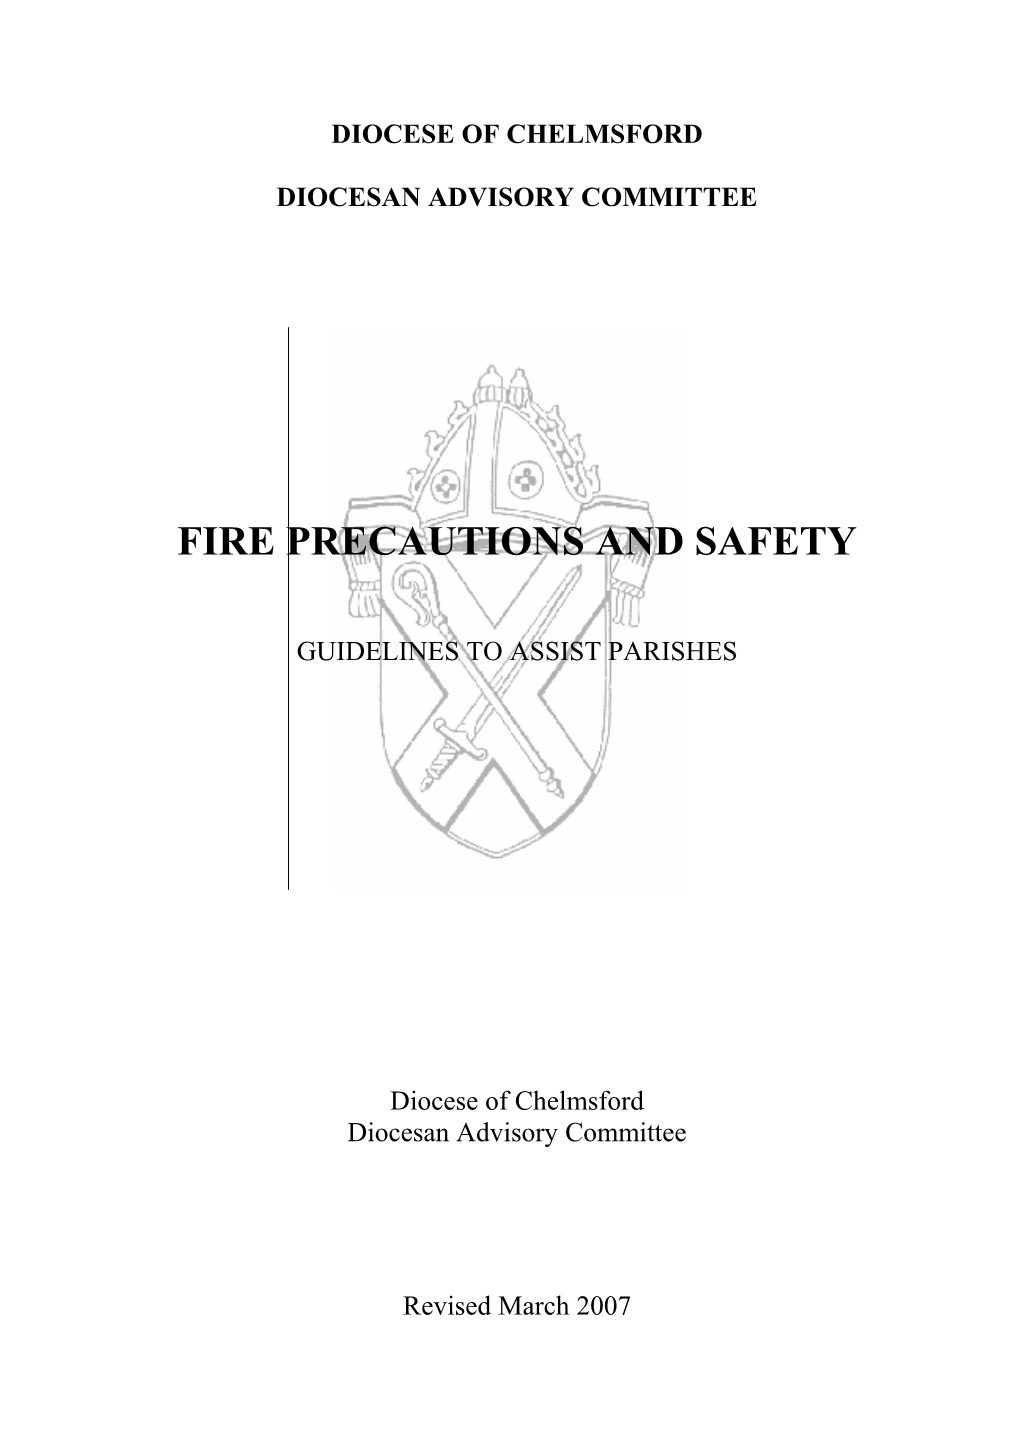 Fire Precautions and Safety